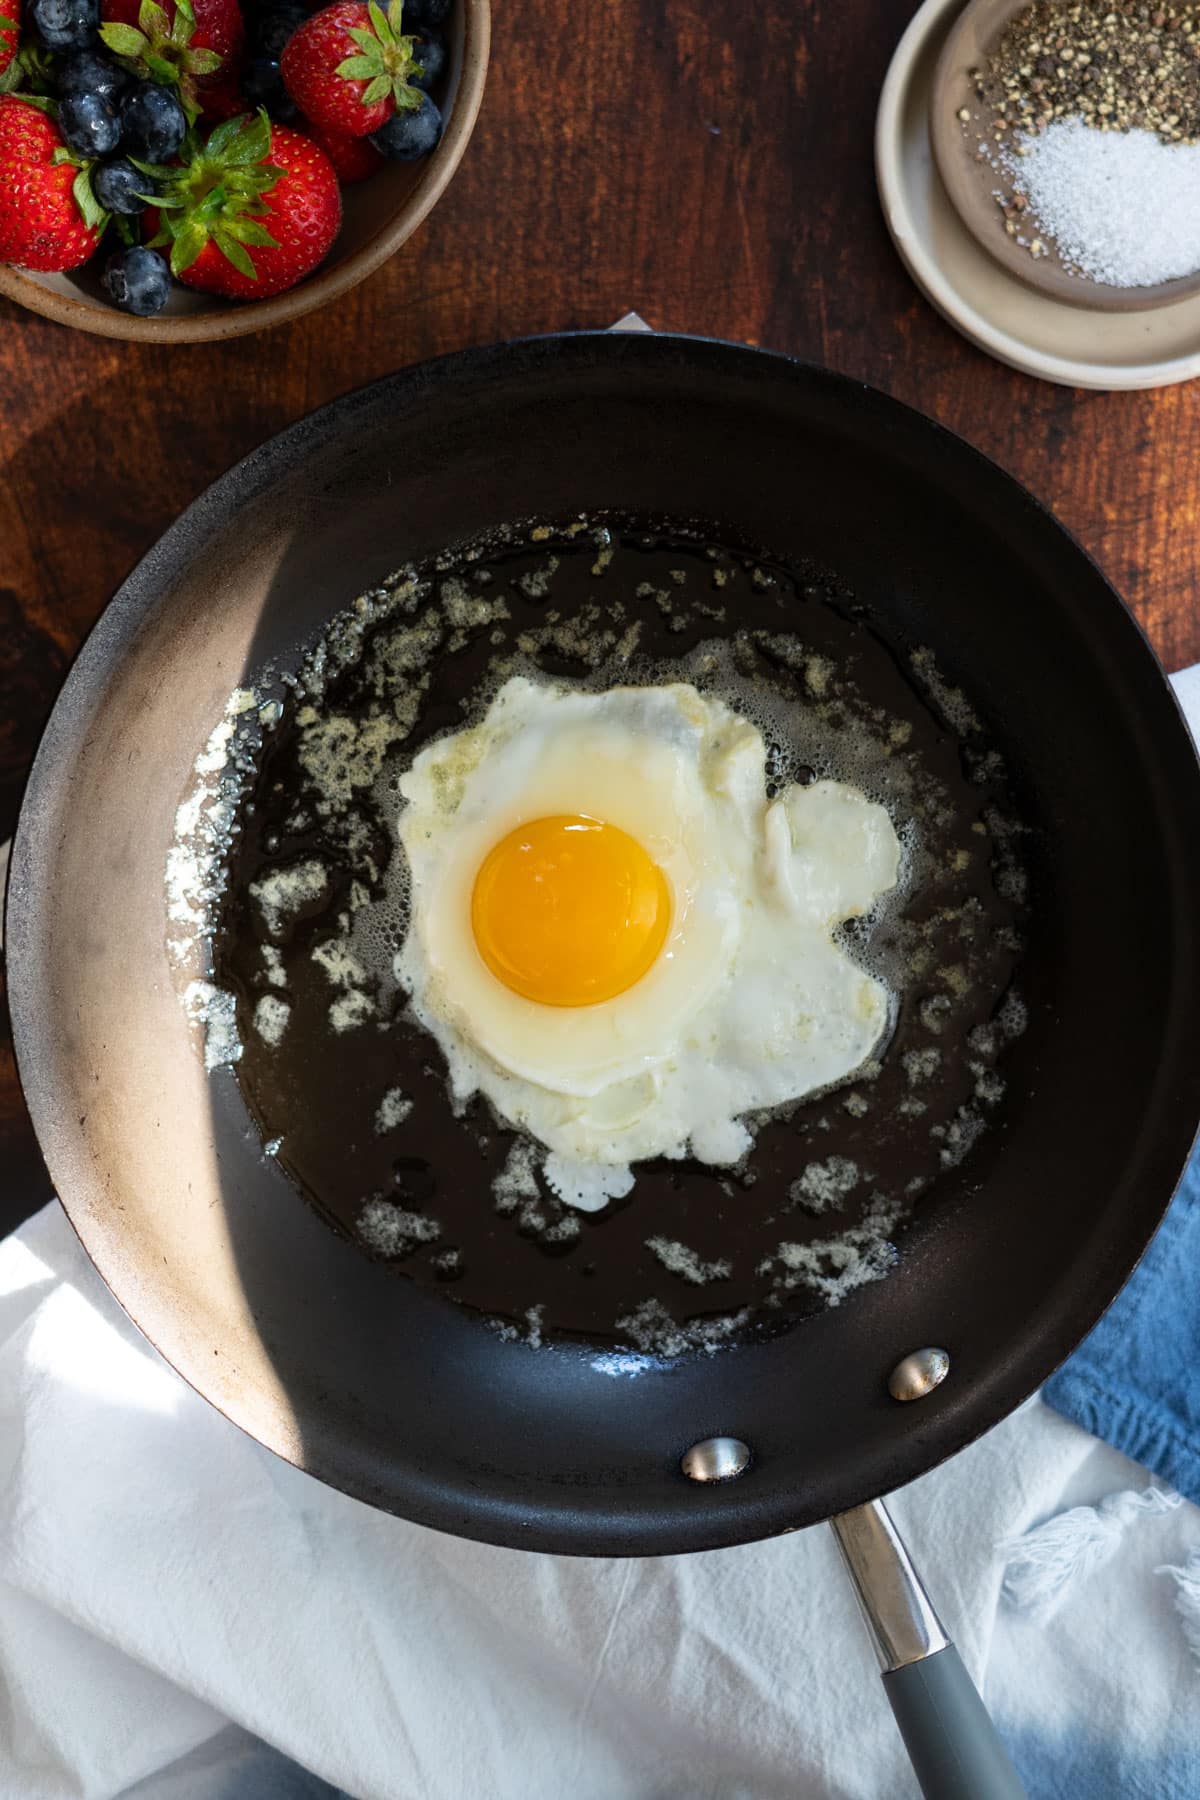 A cracked egg in a non-stick pan.